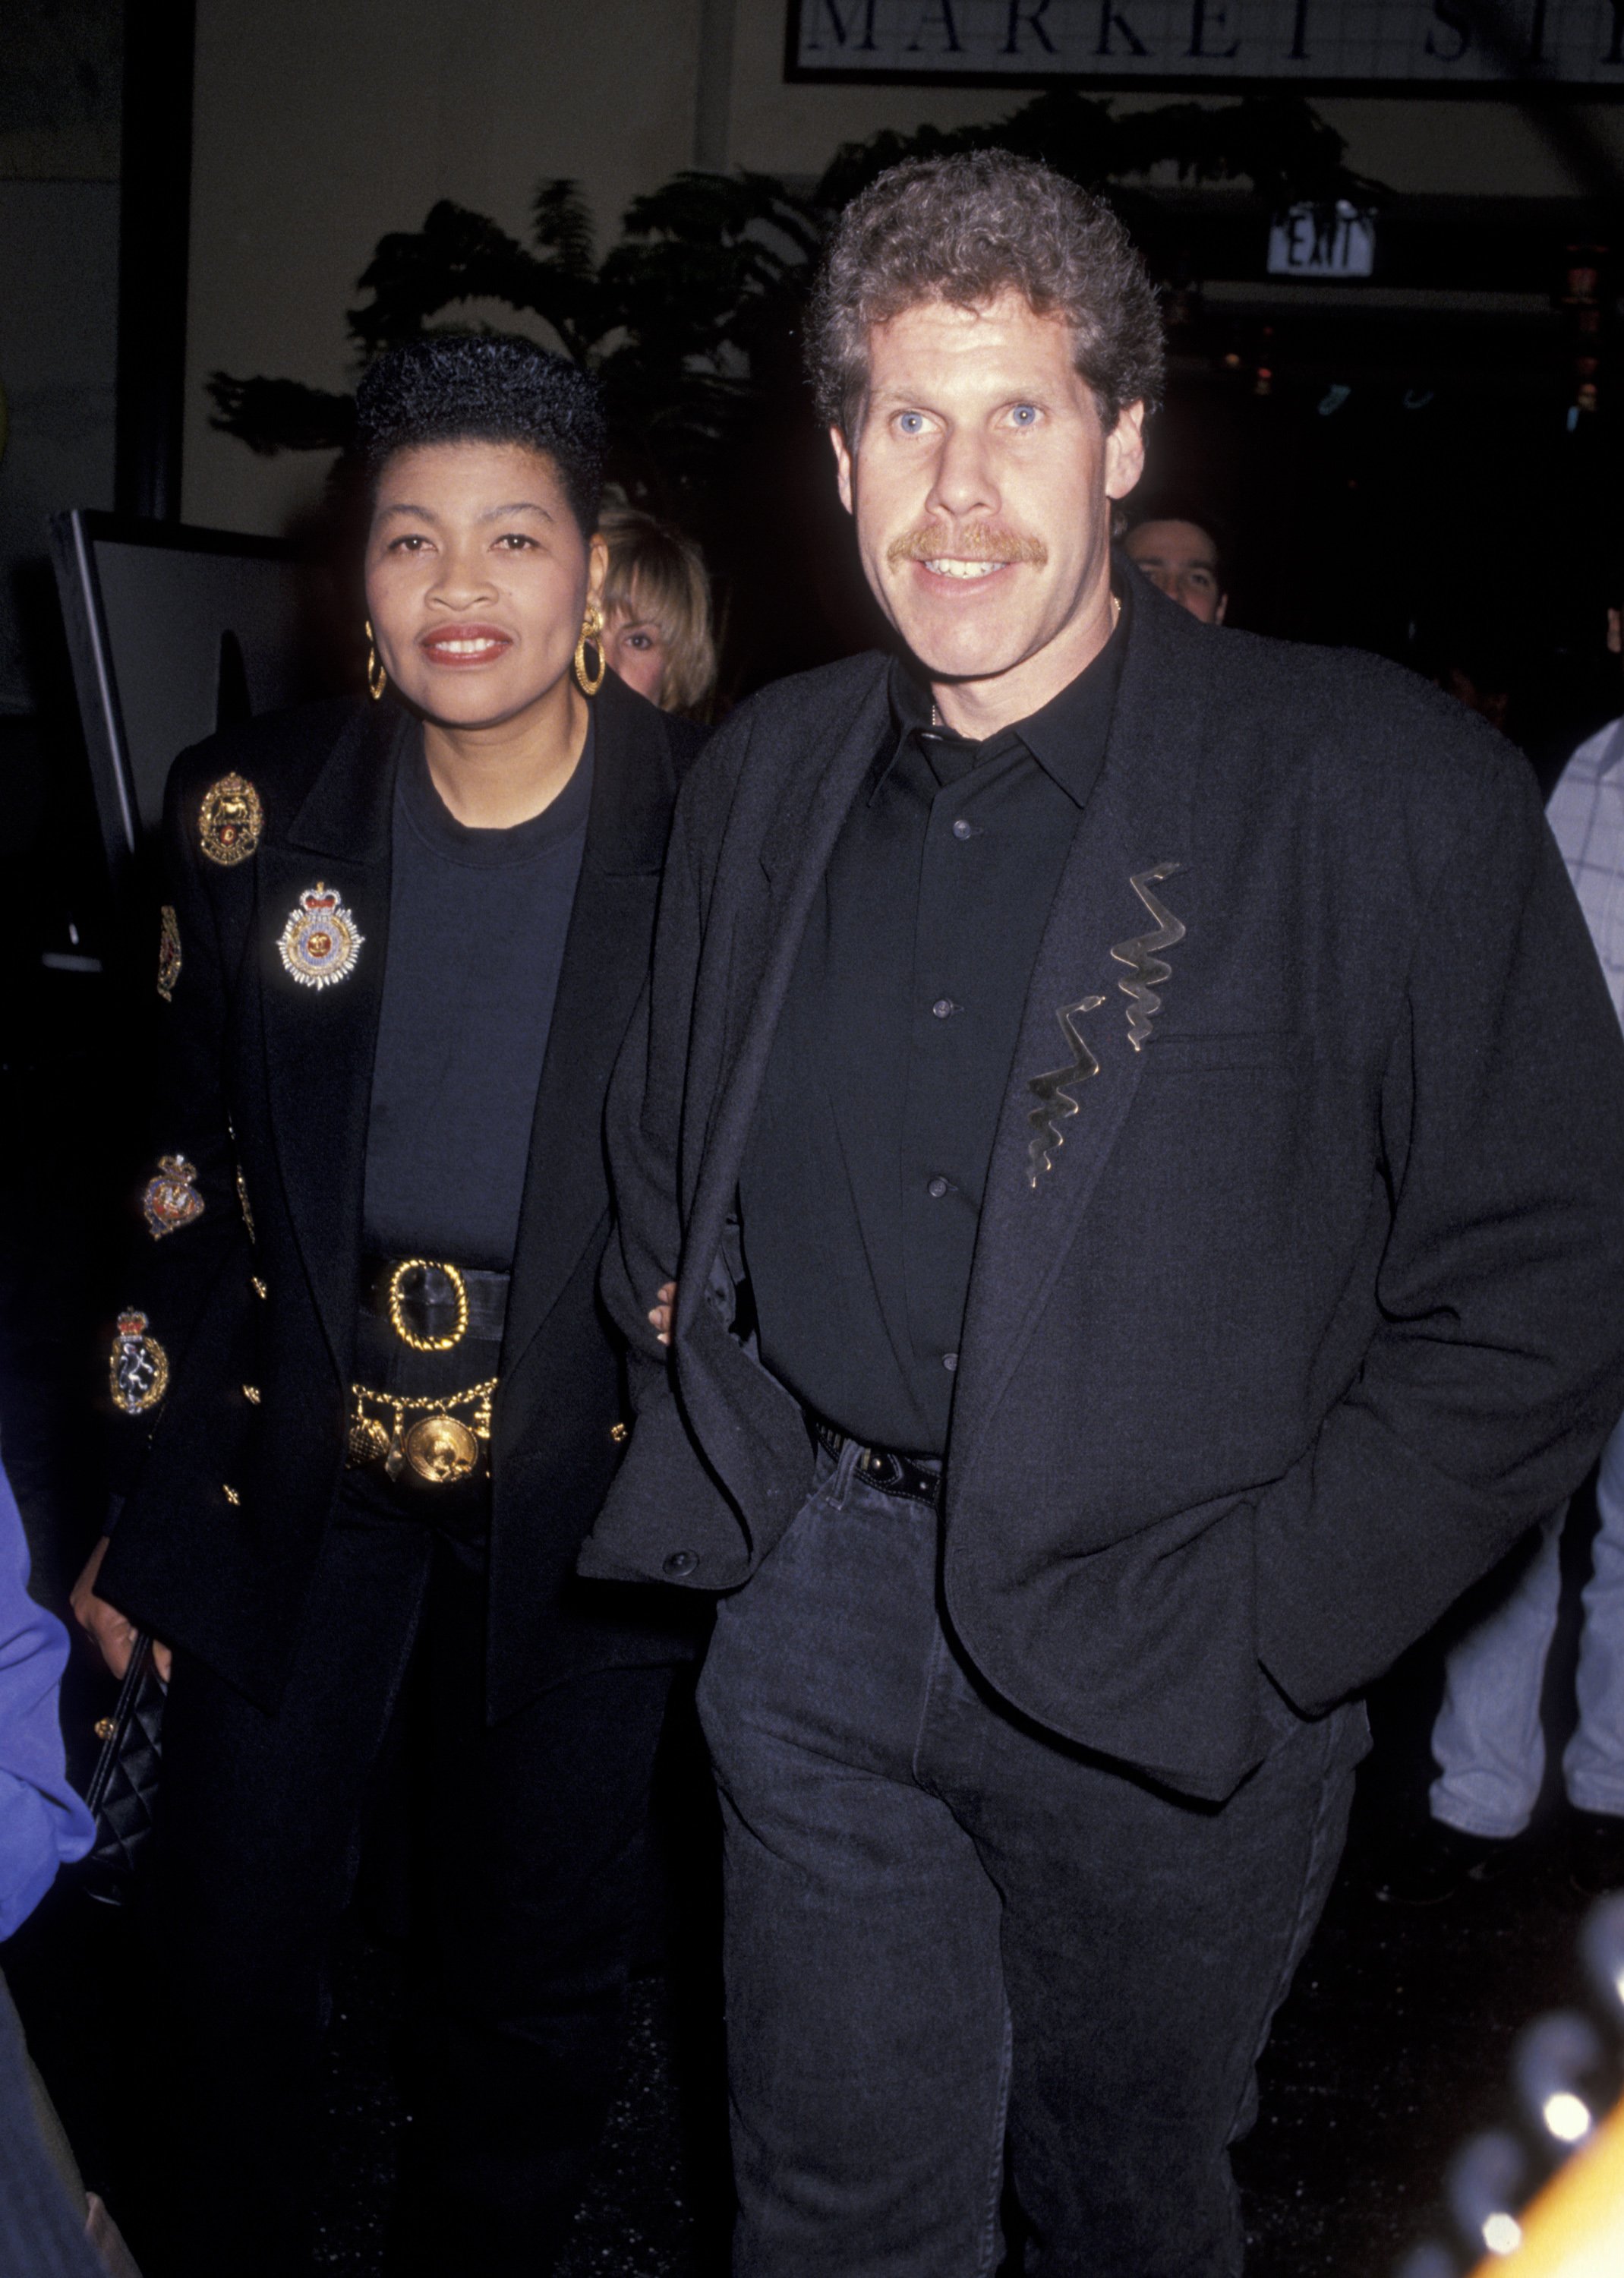 Opal Stone and Ron Perlman at the premiere of "Queens Logic" on January 31, 1991, in Century City, California. | Source: Getty Images